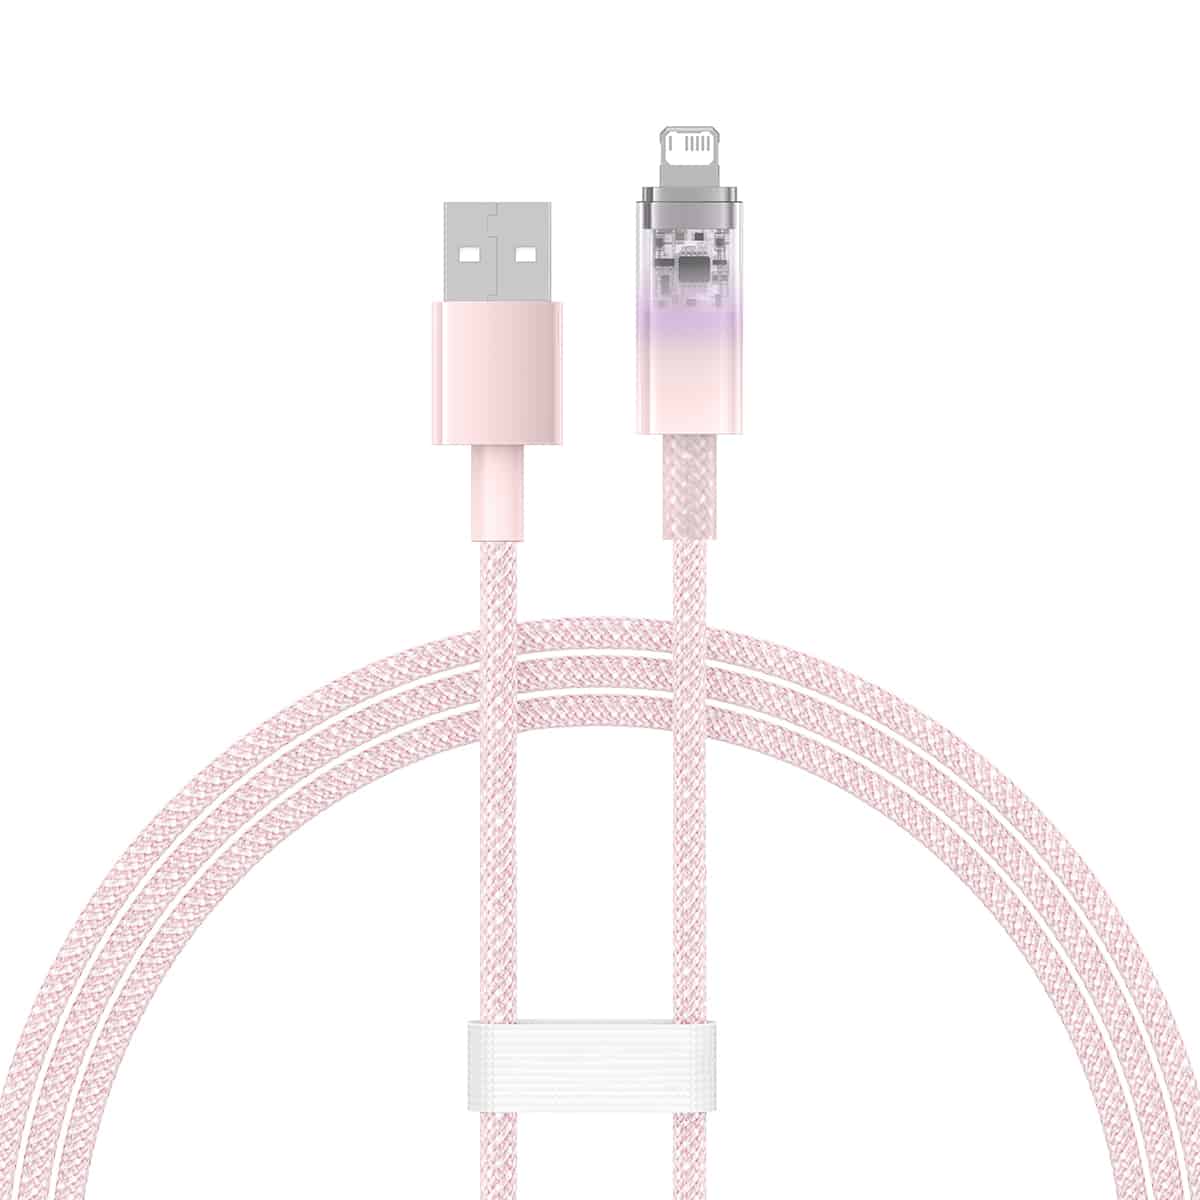 Baseus Explorer Series Fast Charging Cable with Smart Temperature Control USB to iPhone 2.4A